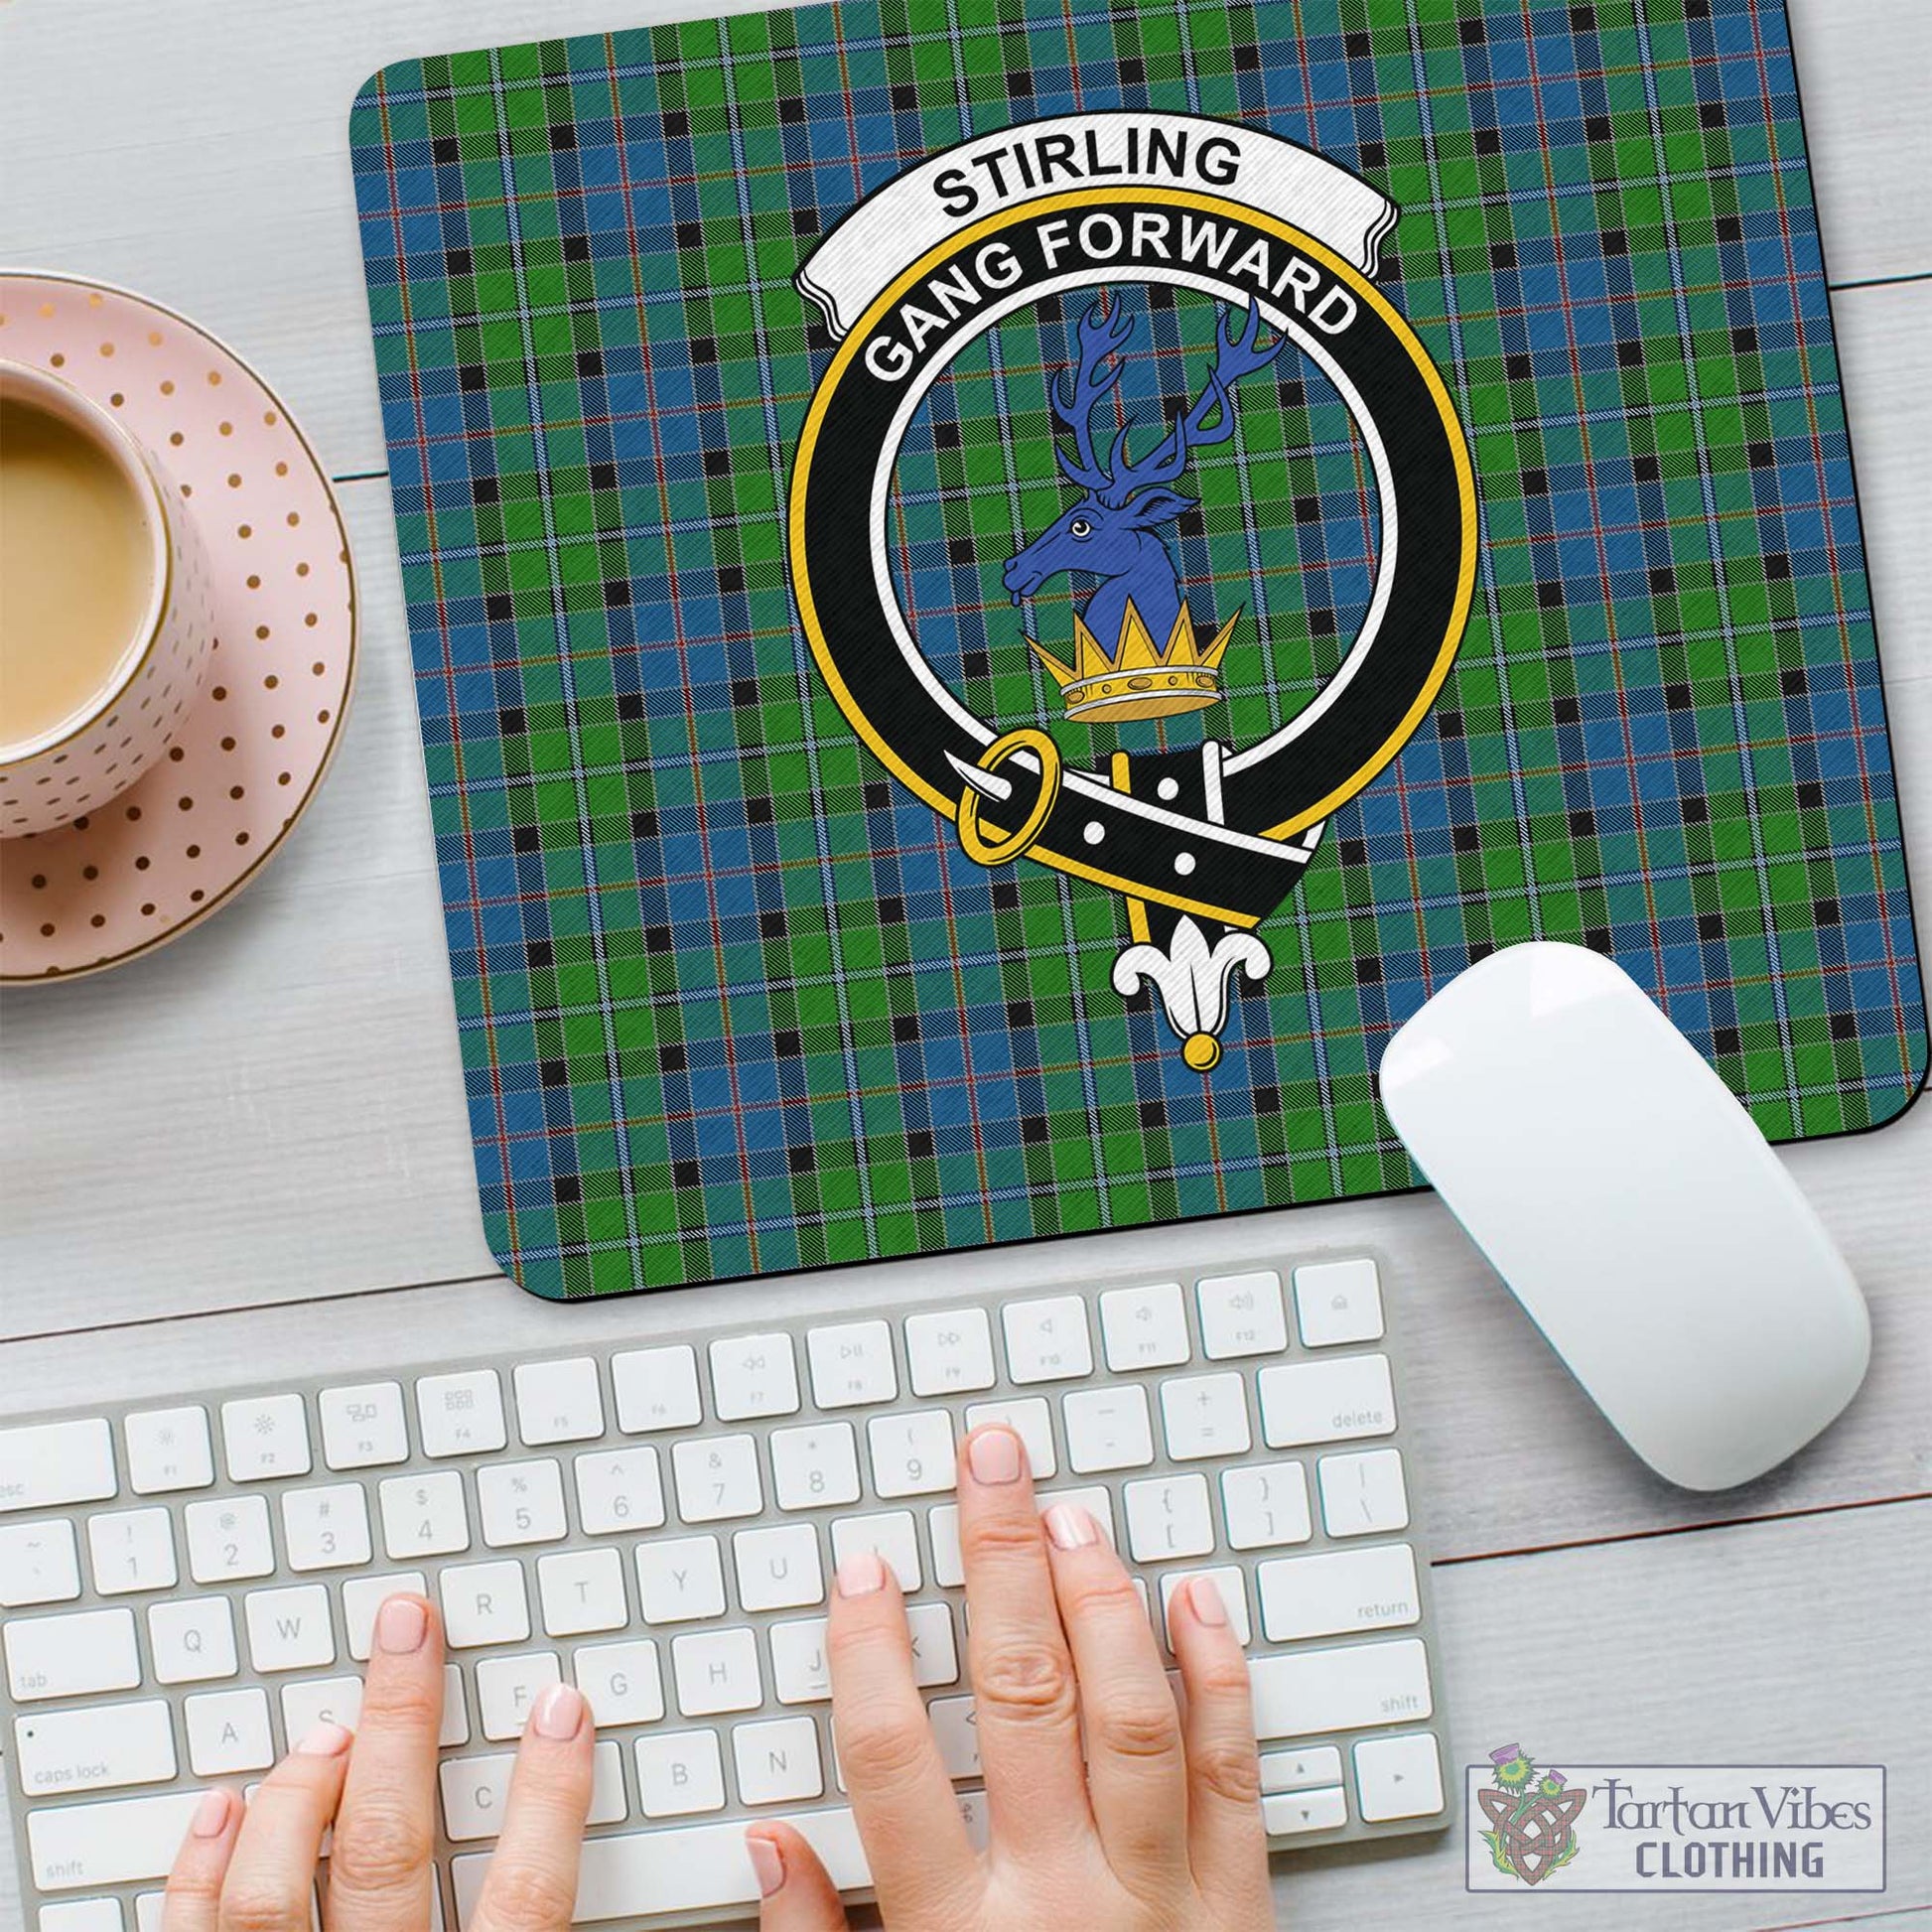 Tartan Vibes Clothing Stirling Tartan Mouse Pad with Family Crest